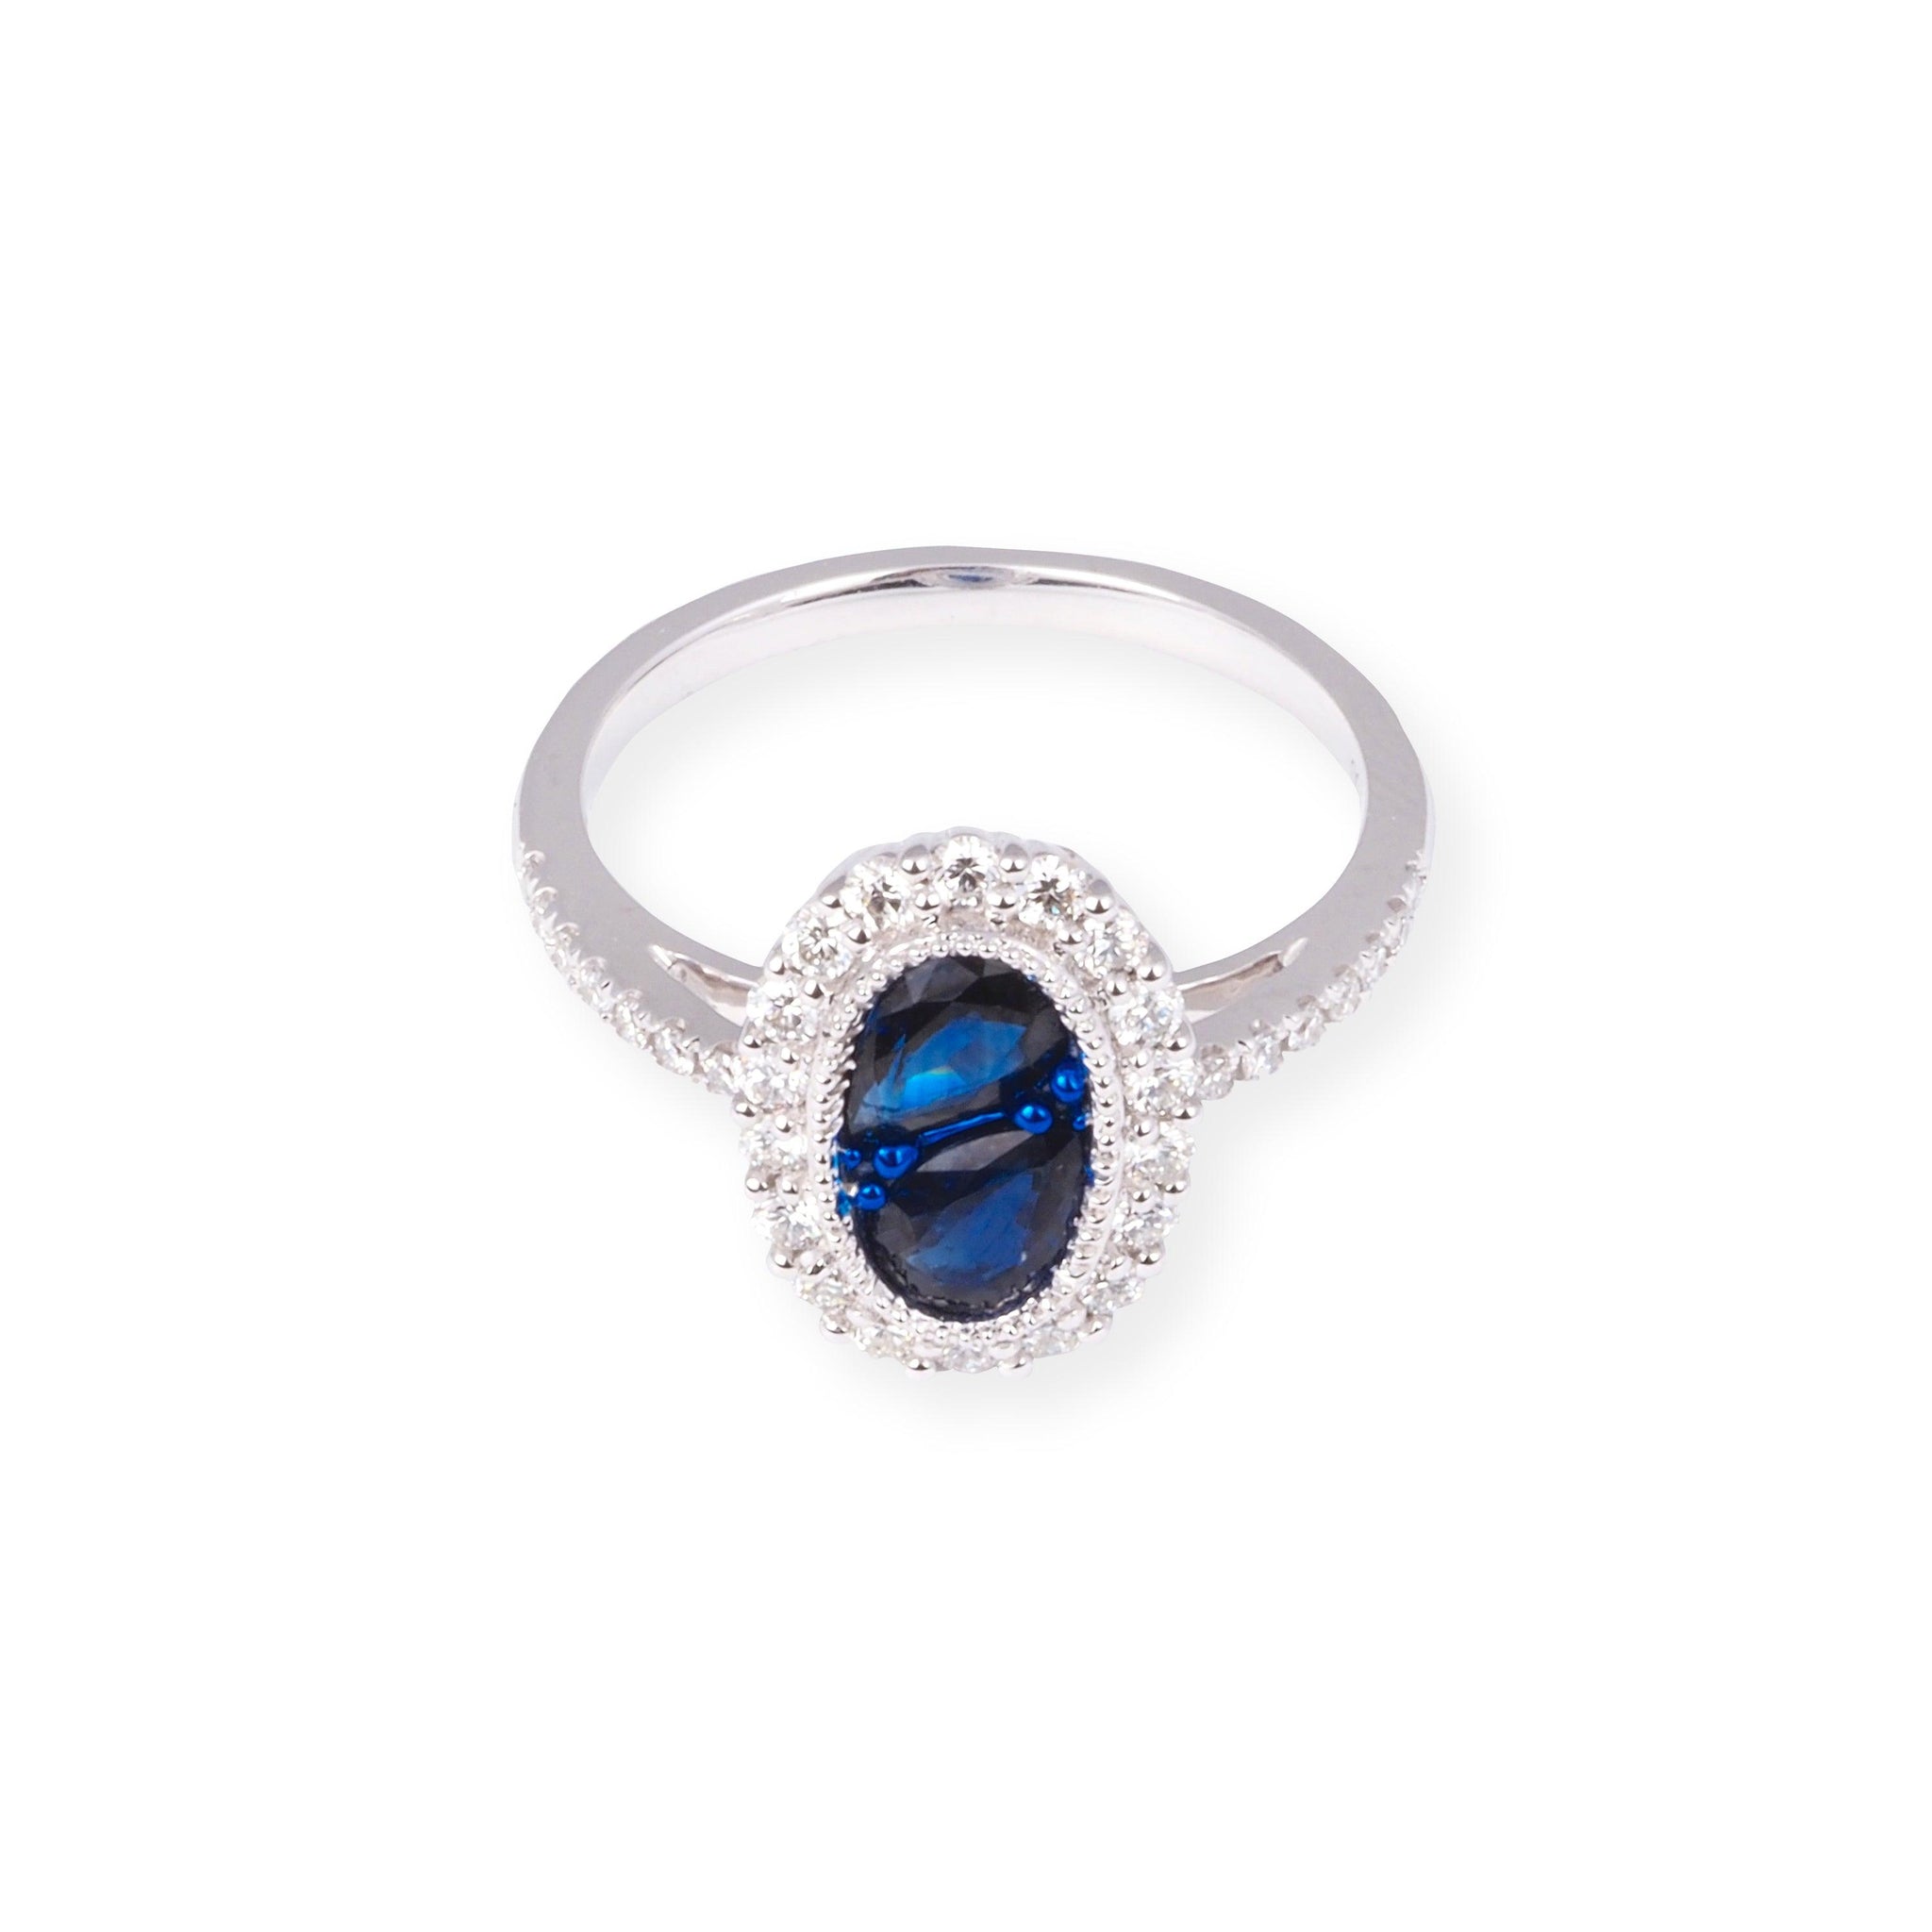 18ct White Gold Oval Shaped Diamond & Blue Sapphire Ring LR-7044